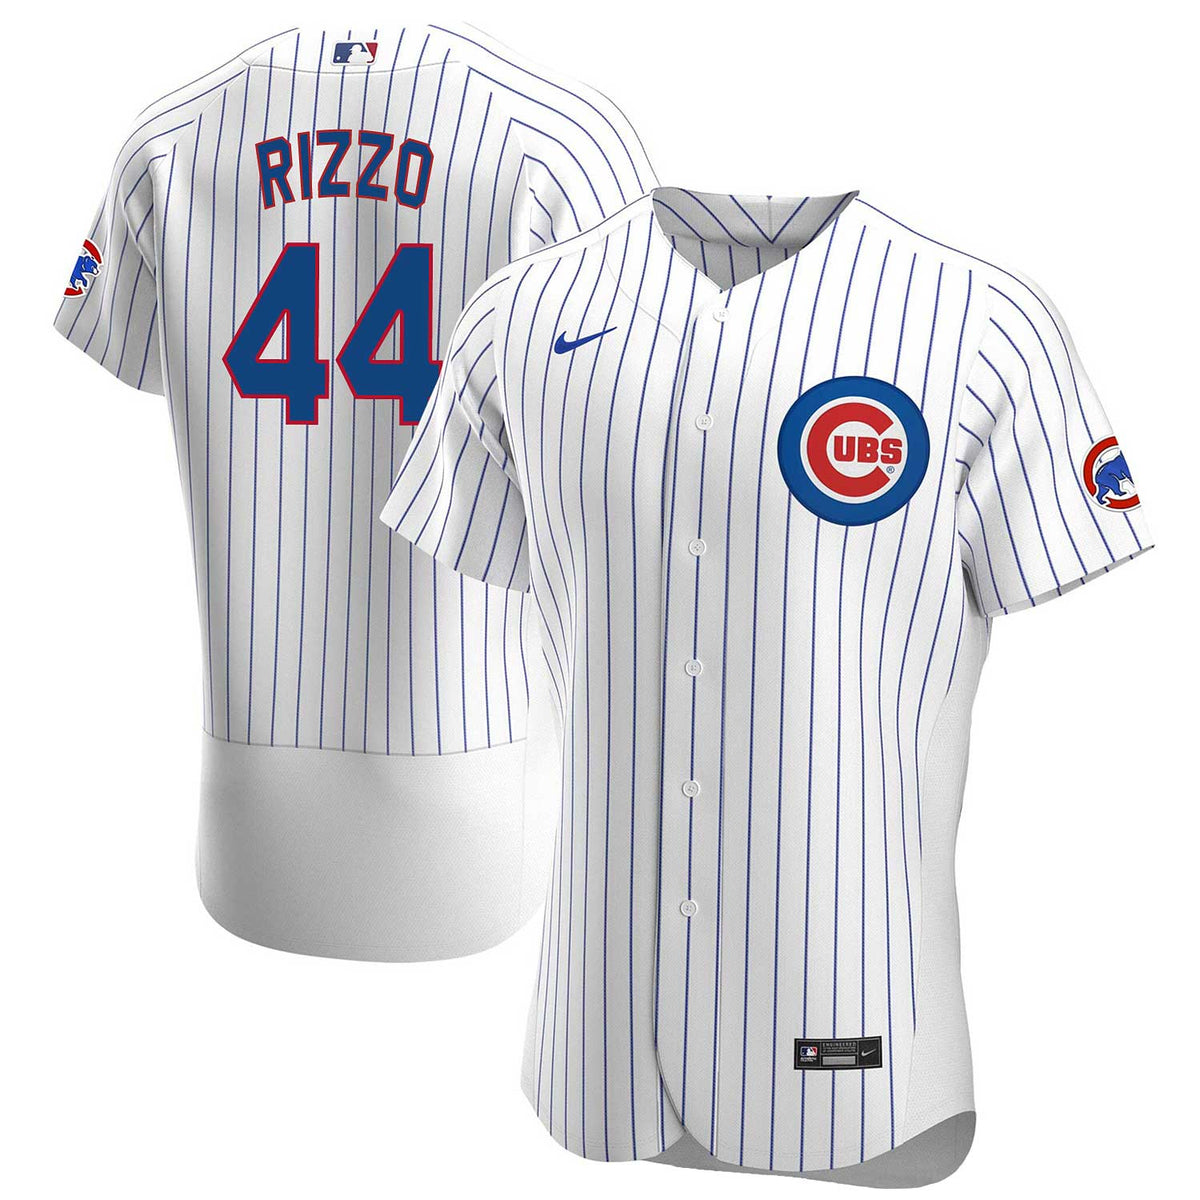 Men's Majestic Anthony Rizzo White/Royal Chicago Cubs Home Flex Base  Authentic Collection Jersey with 100 Years at Wrigley Field Commemorative  Patch